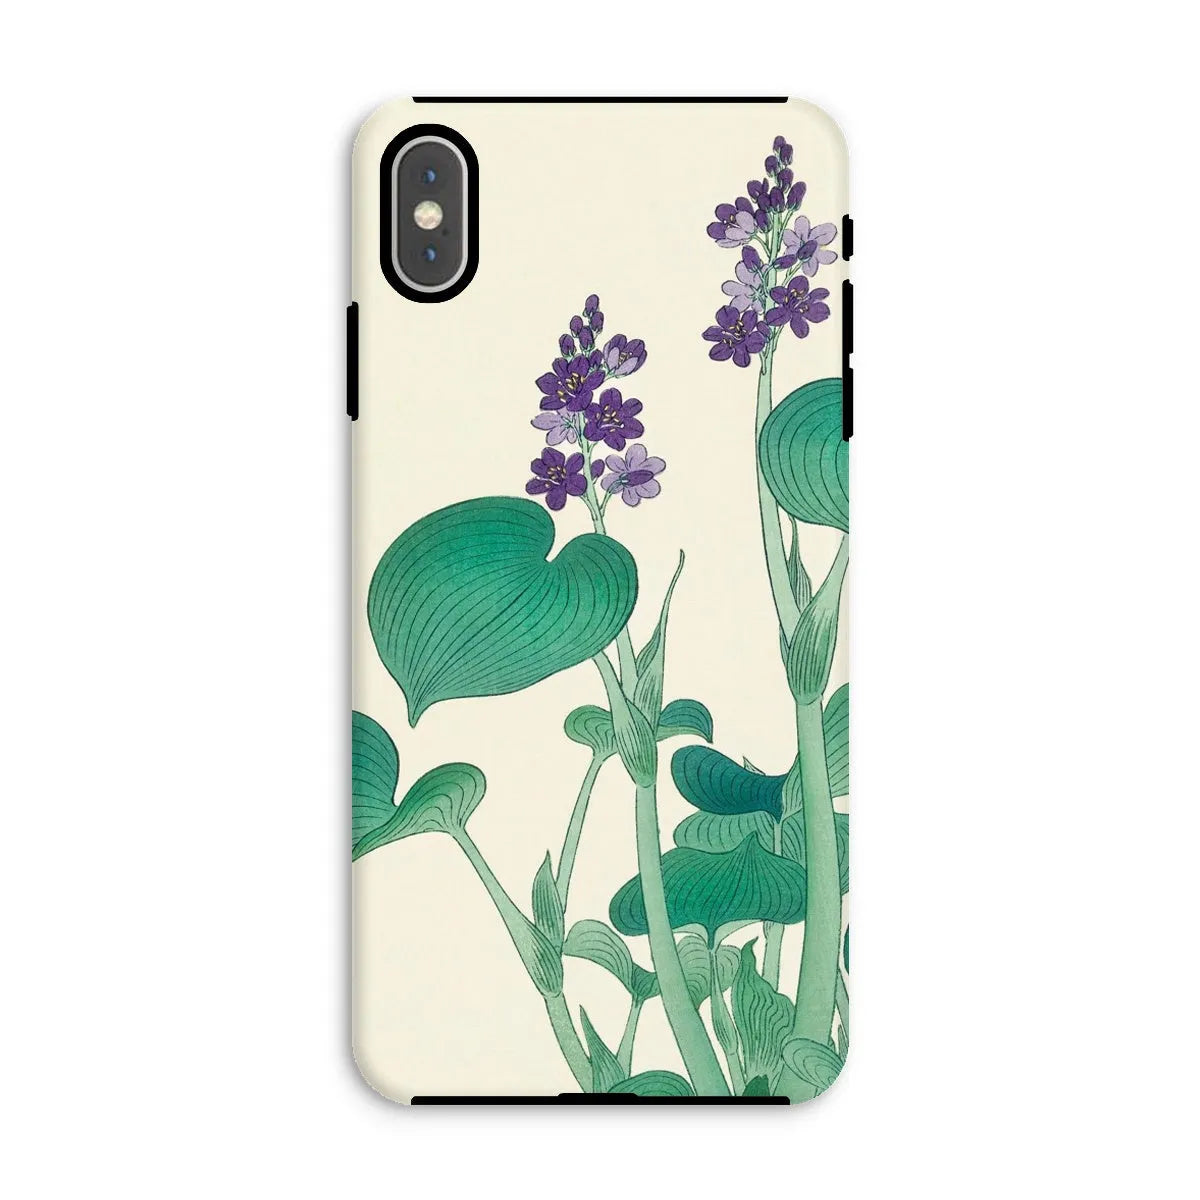 Blooming Hosta - Floral Aesthetic Art Phone Case - Ohara Koson - Iphone Xs Max / Matte - Mobile Phone Cases - Aesthetic